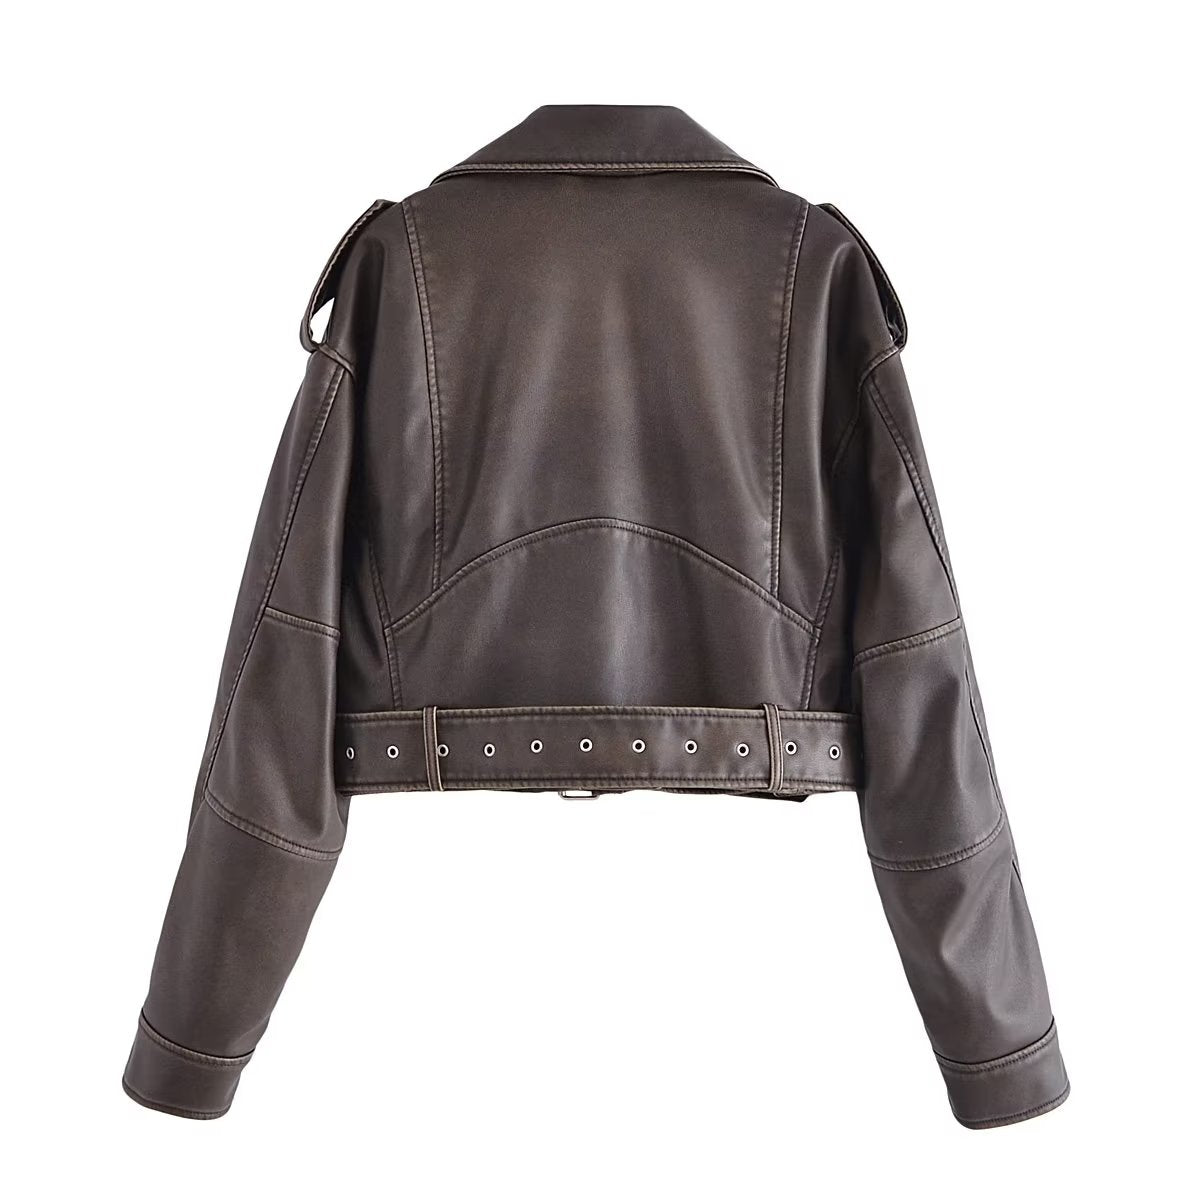 Cropped Leather Coat Women Autumn Winter Fashionable Slim Washed Gradient Color Motorcycle Clothing Jacket